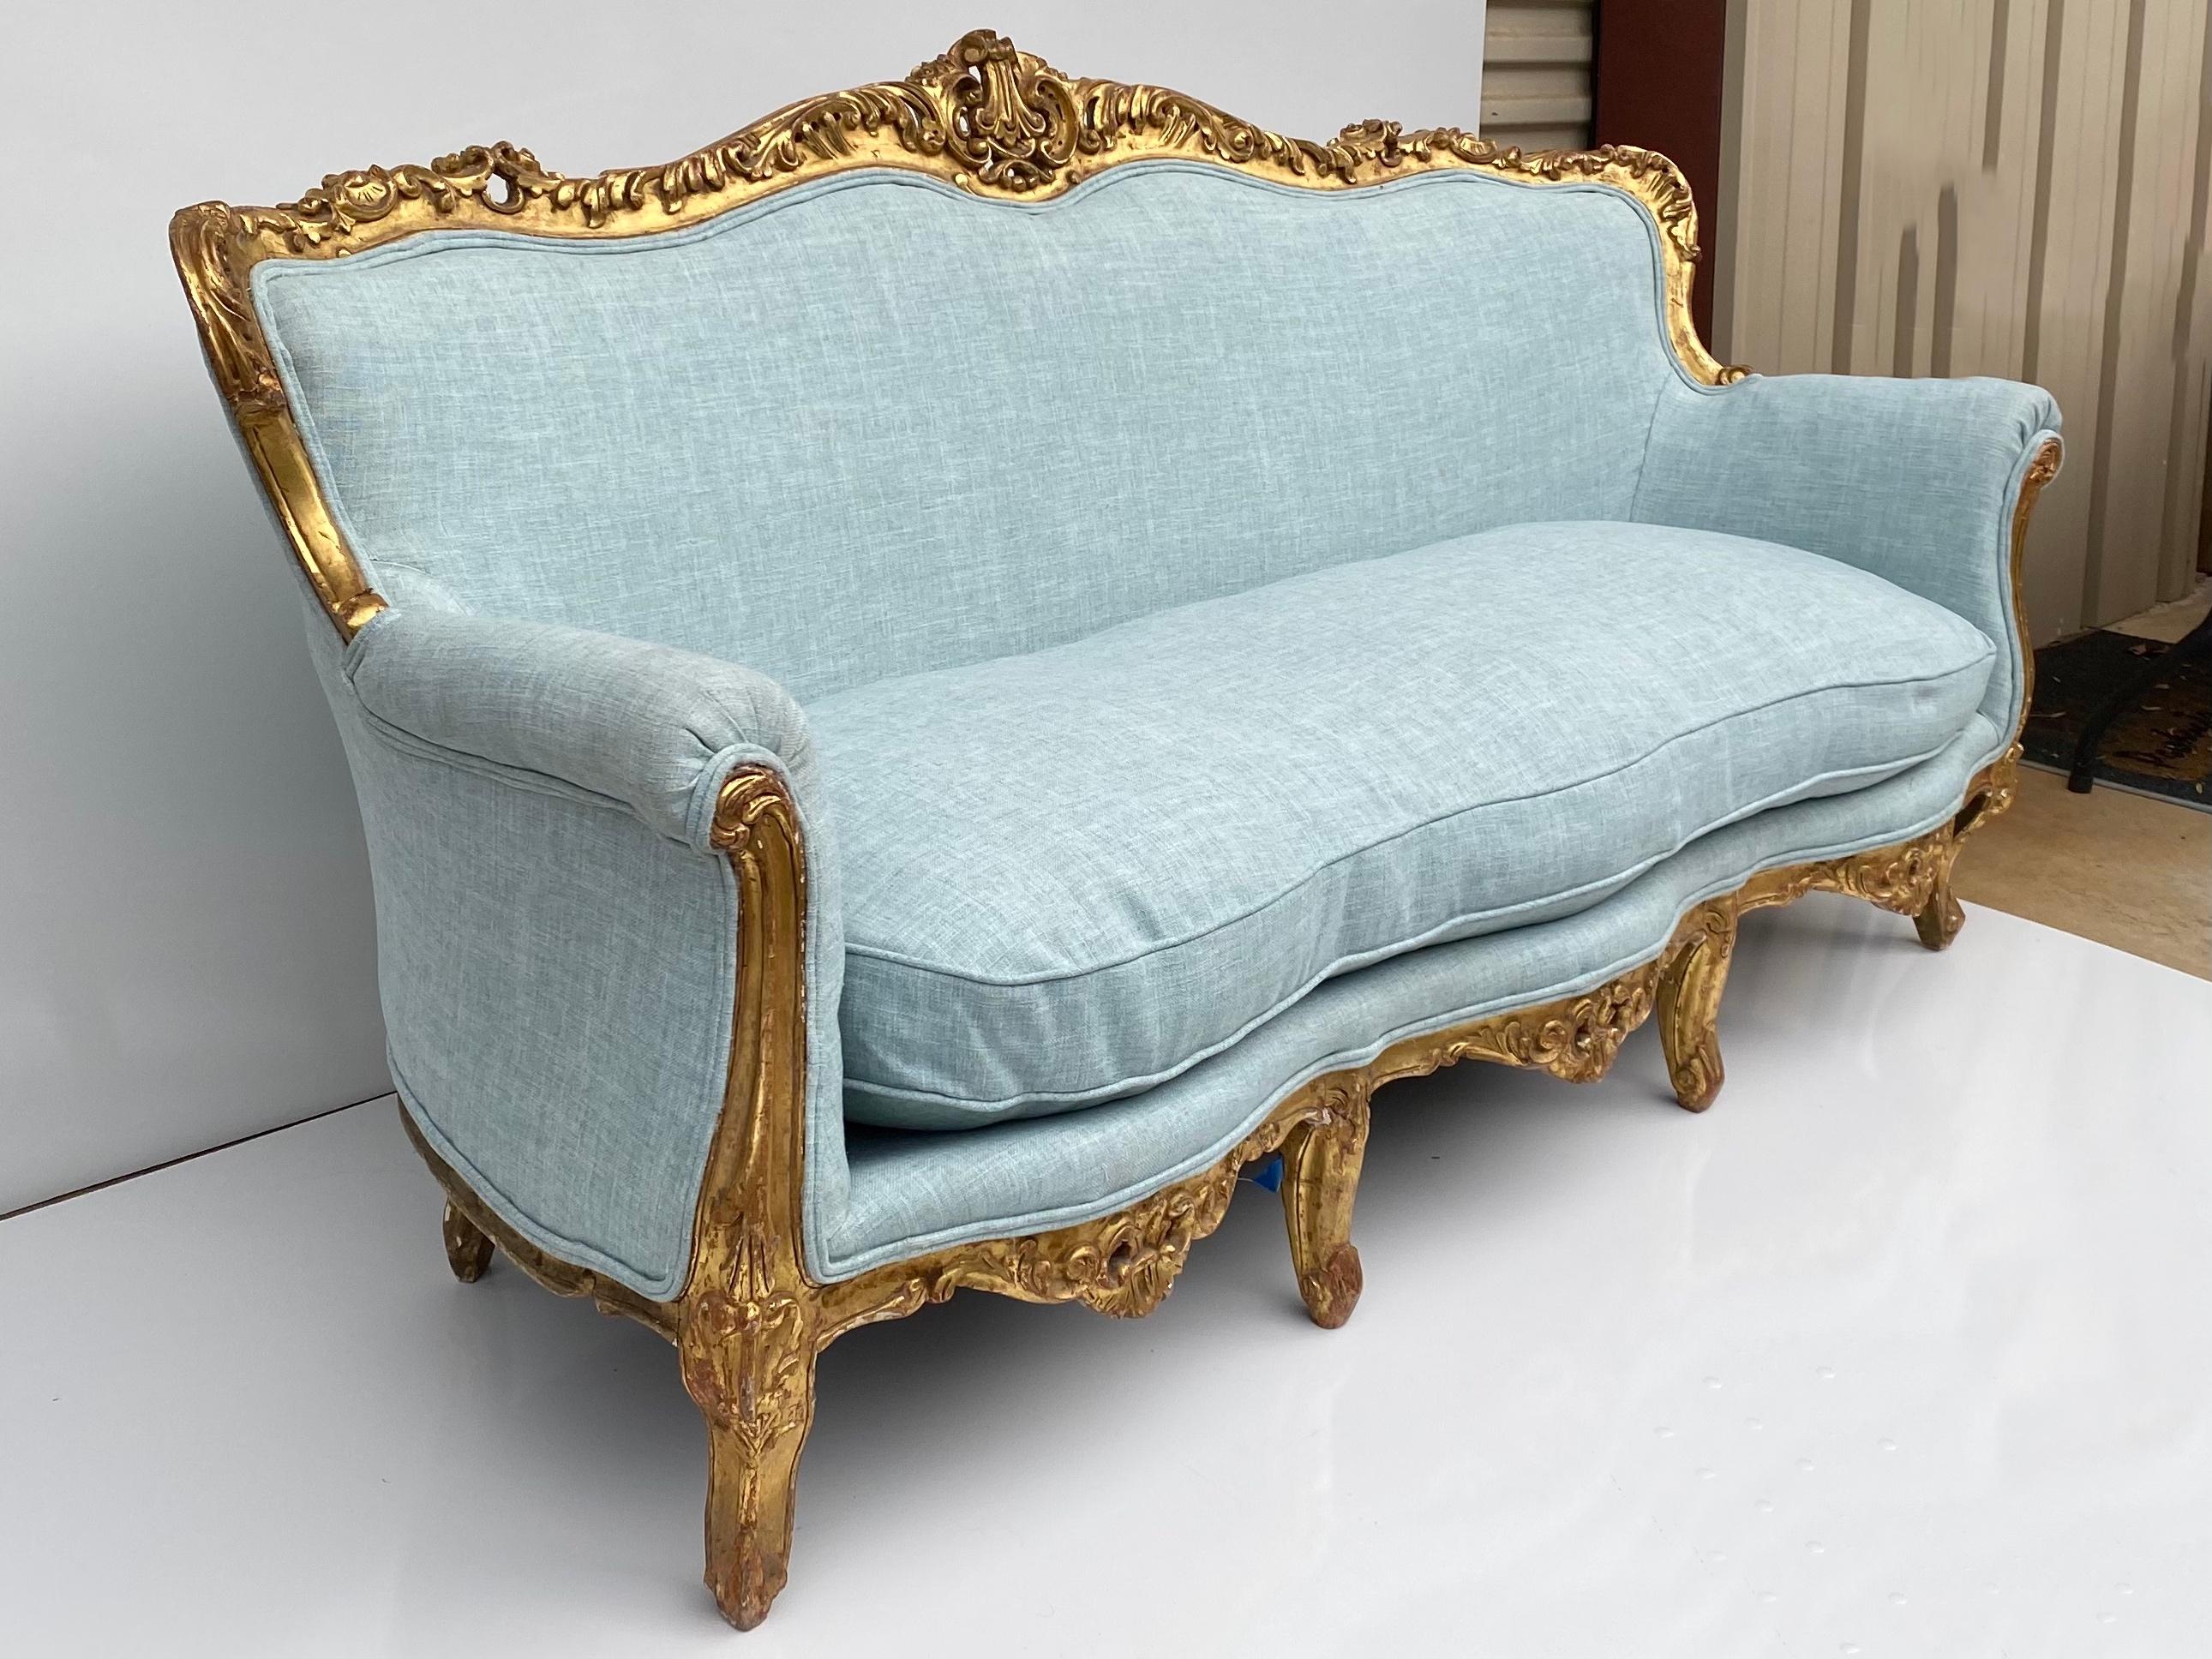 Love this! This is an antique French sofa or canapé with a carved water gilt frame. The frame does show some age appropriate wear. The upholstery is a new turquoise/blue linen. The cushions are down. Measures: Seat 19” H, arm 26.5” H. SD 22”.